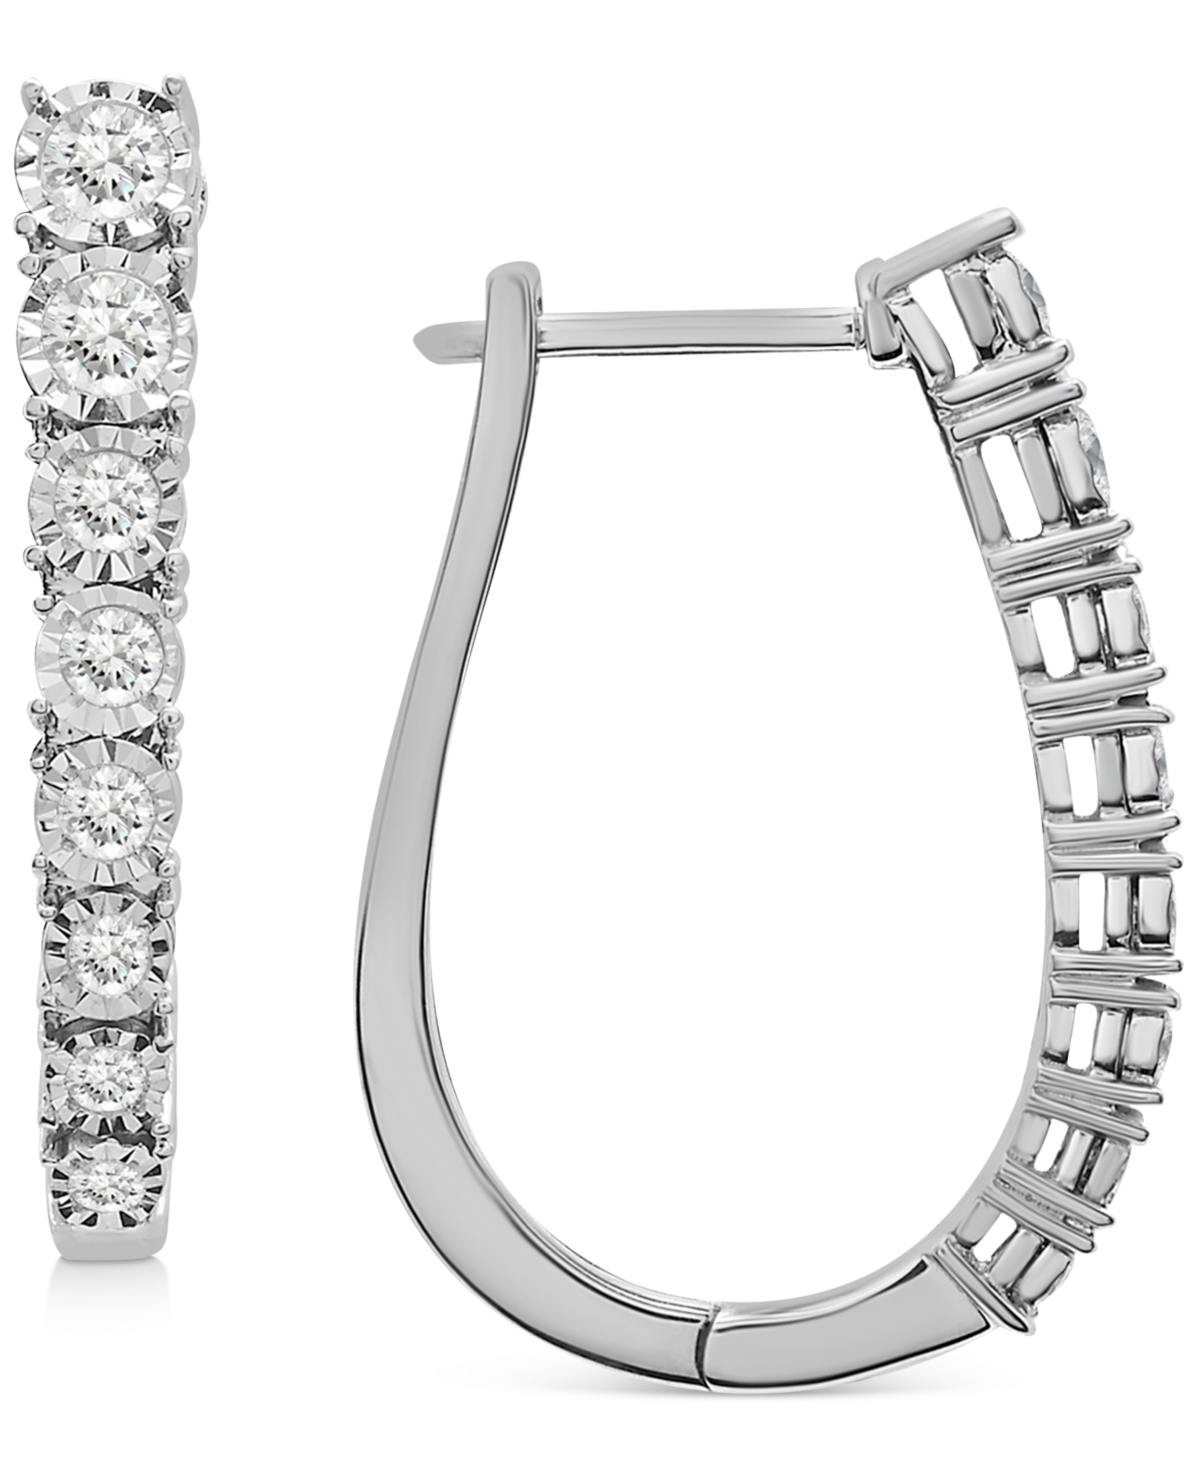 Diamond Graduated Oval Hoop Earrings (1 ct. t.w.) in Sterling Silver, Created for Macy's - Sterling Silver